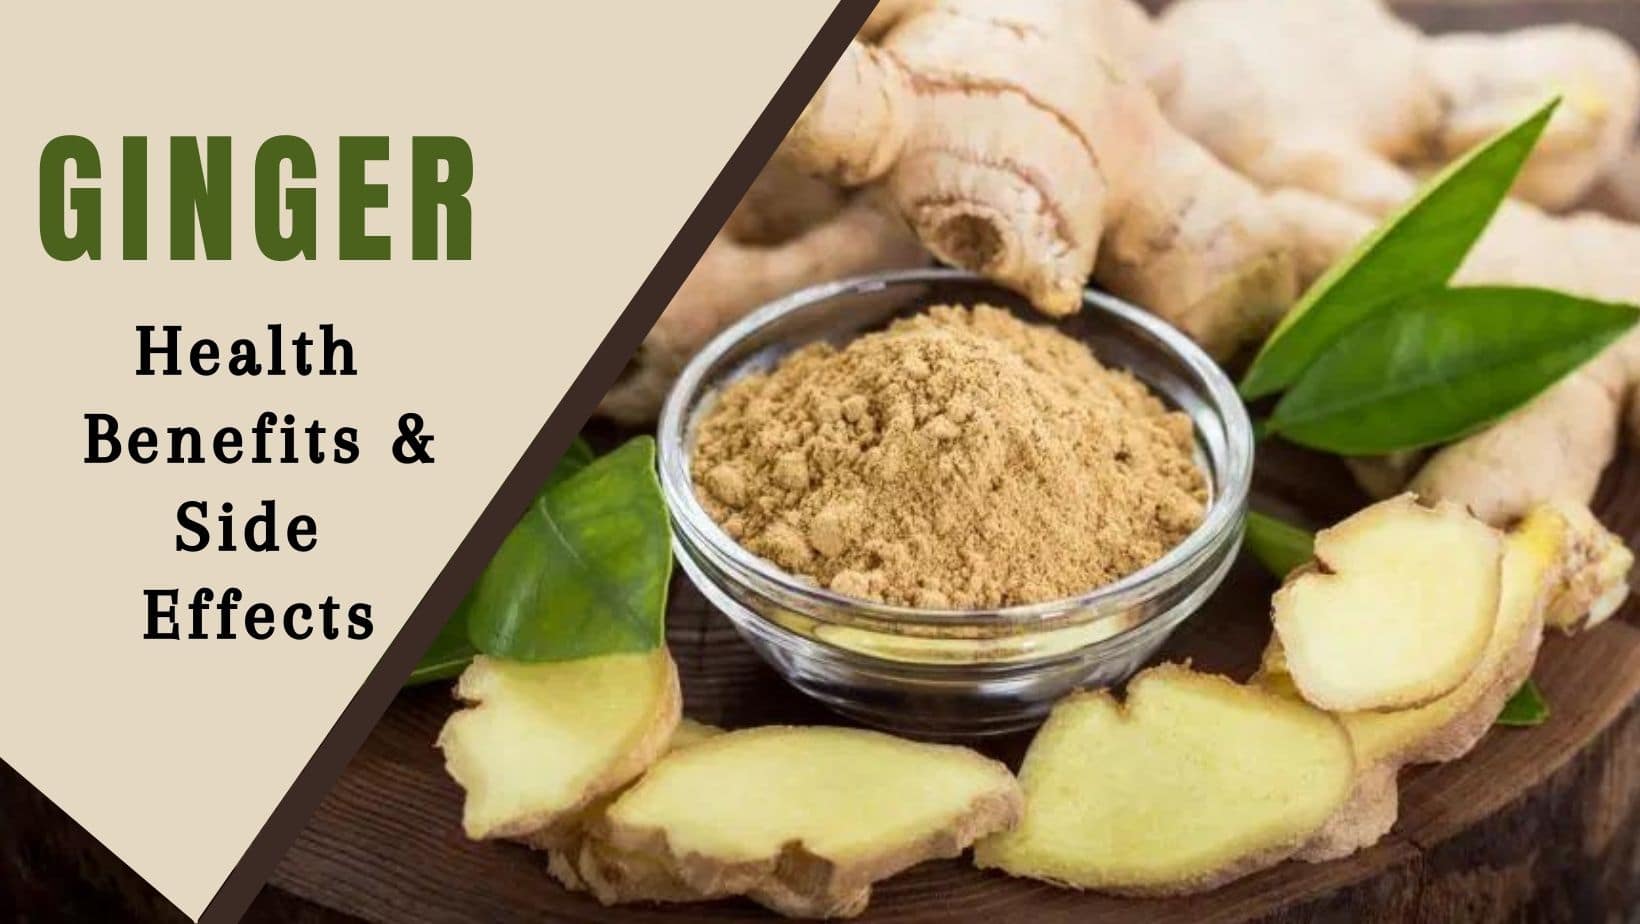 Ginger: Health Benefits, Uses, Side Effects and More